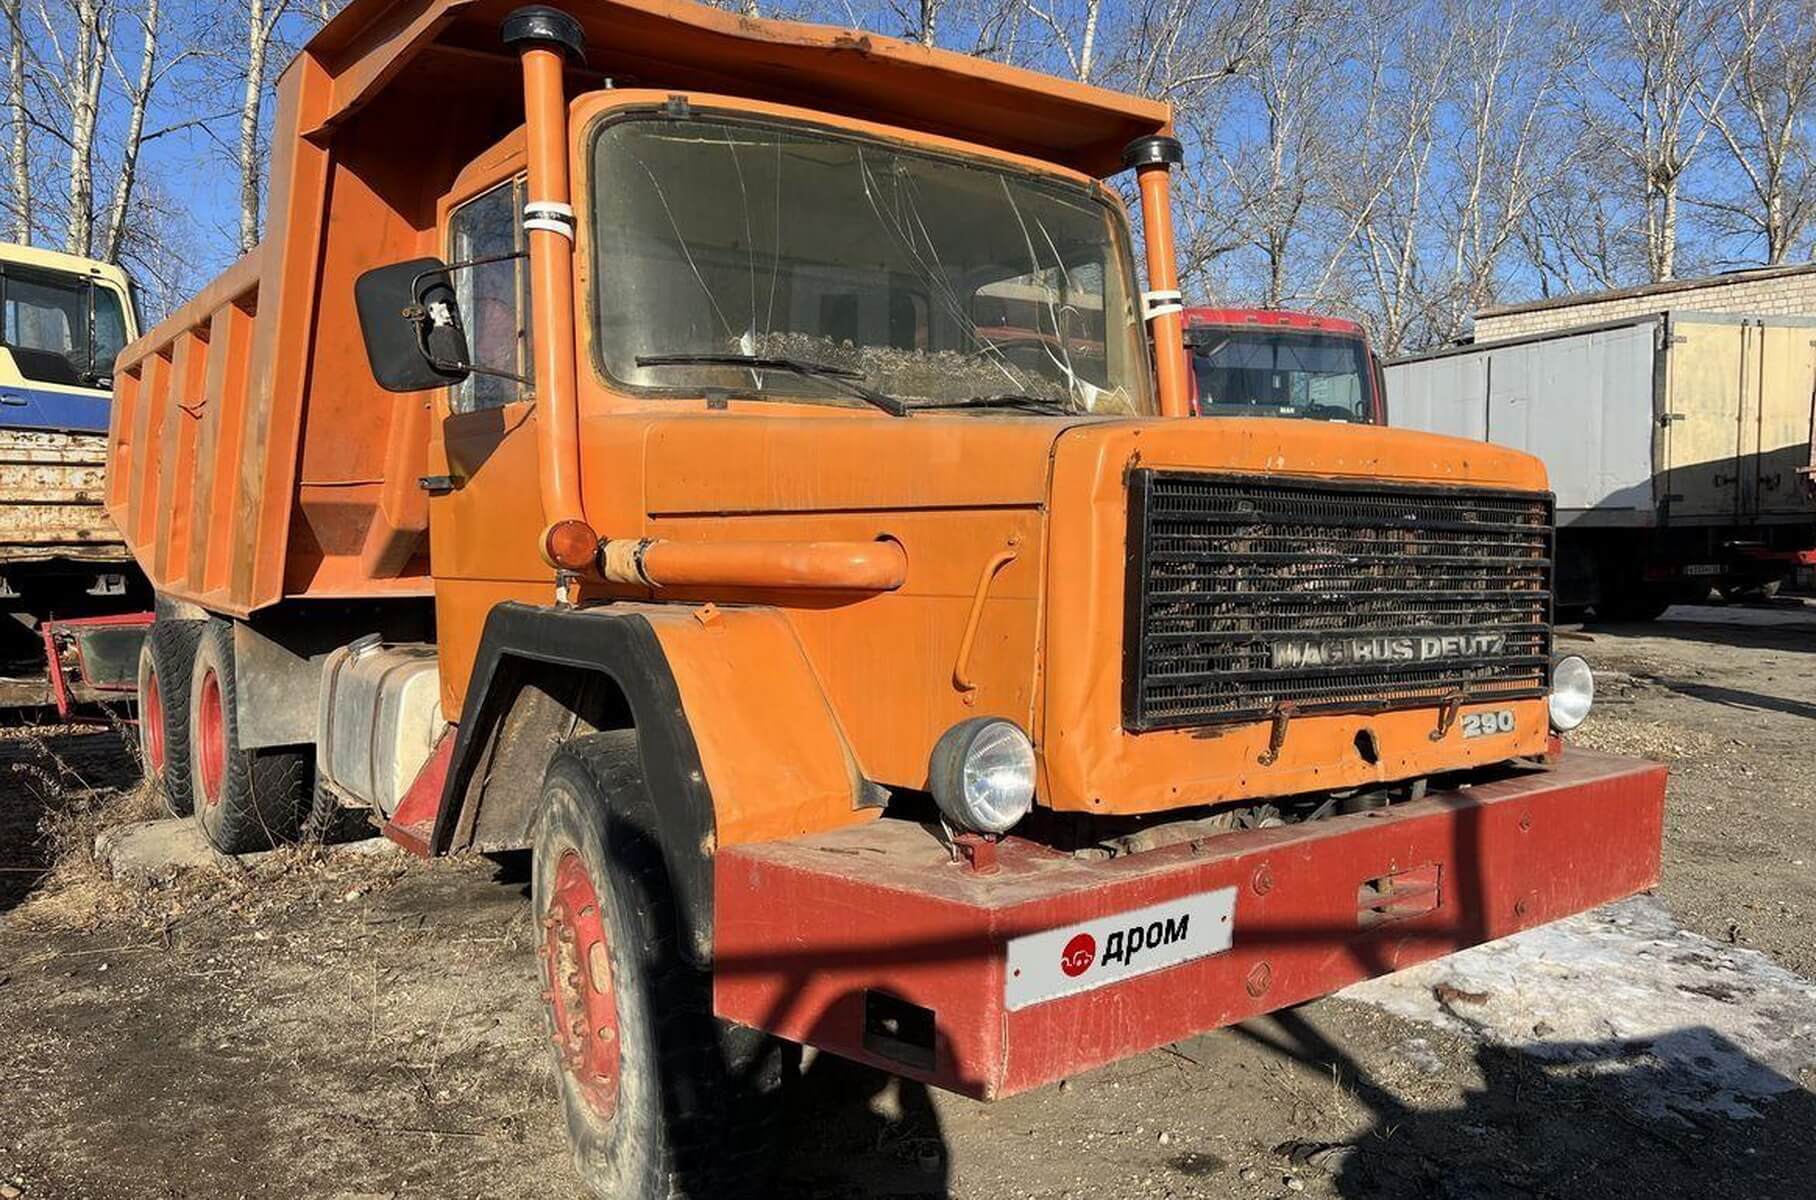 Magirus trucks, which were built by BAM, were put up for sale in Russia